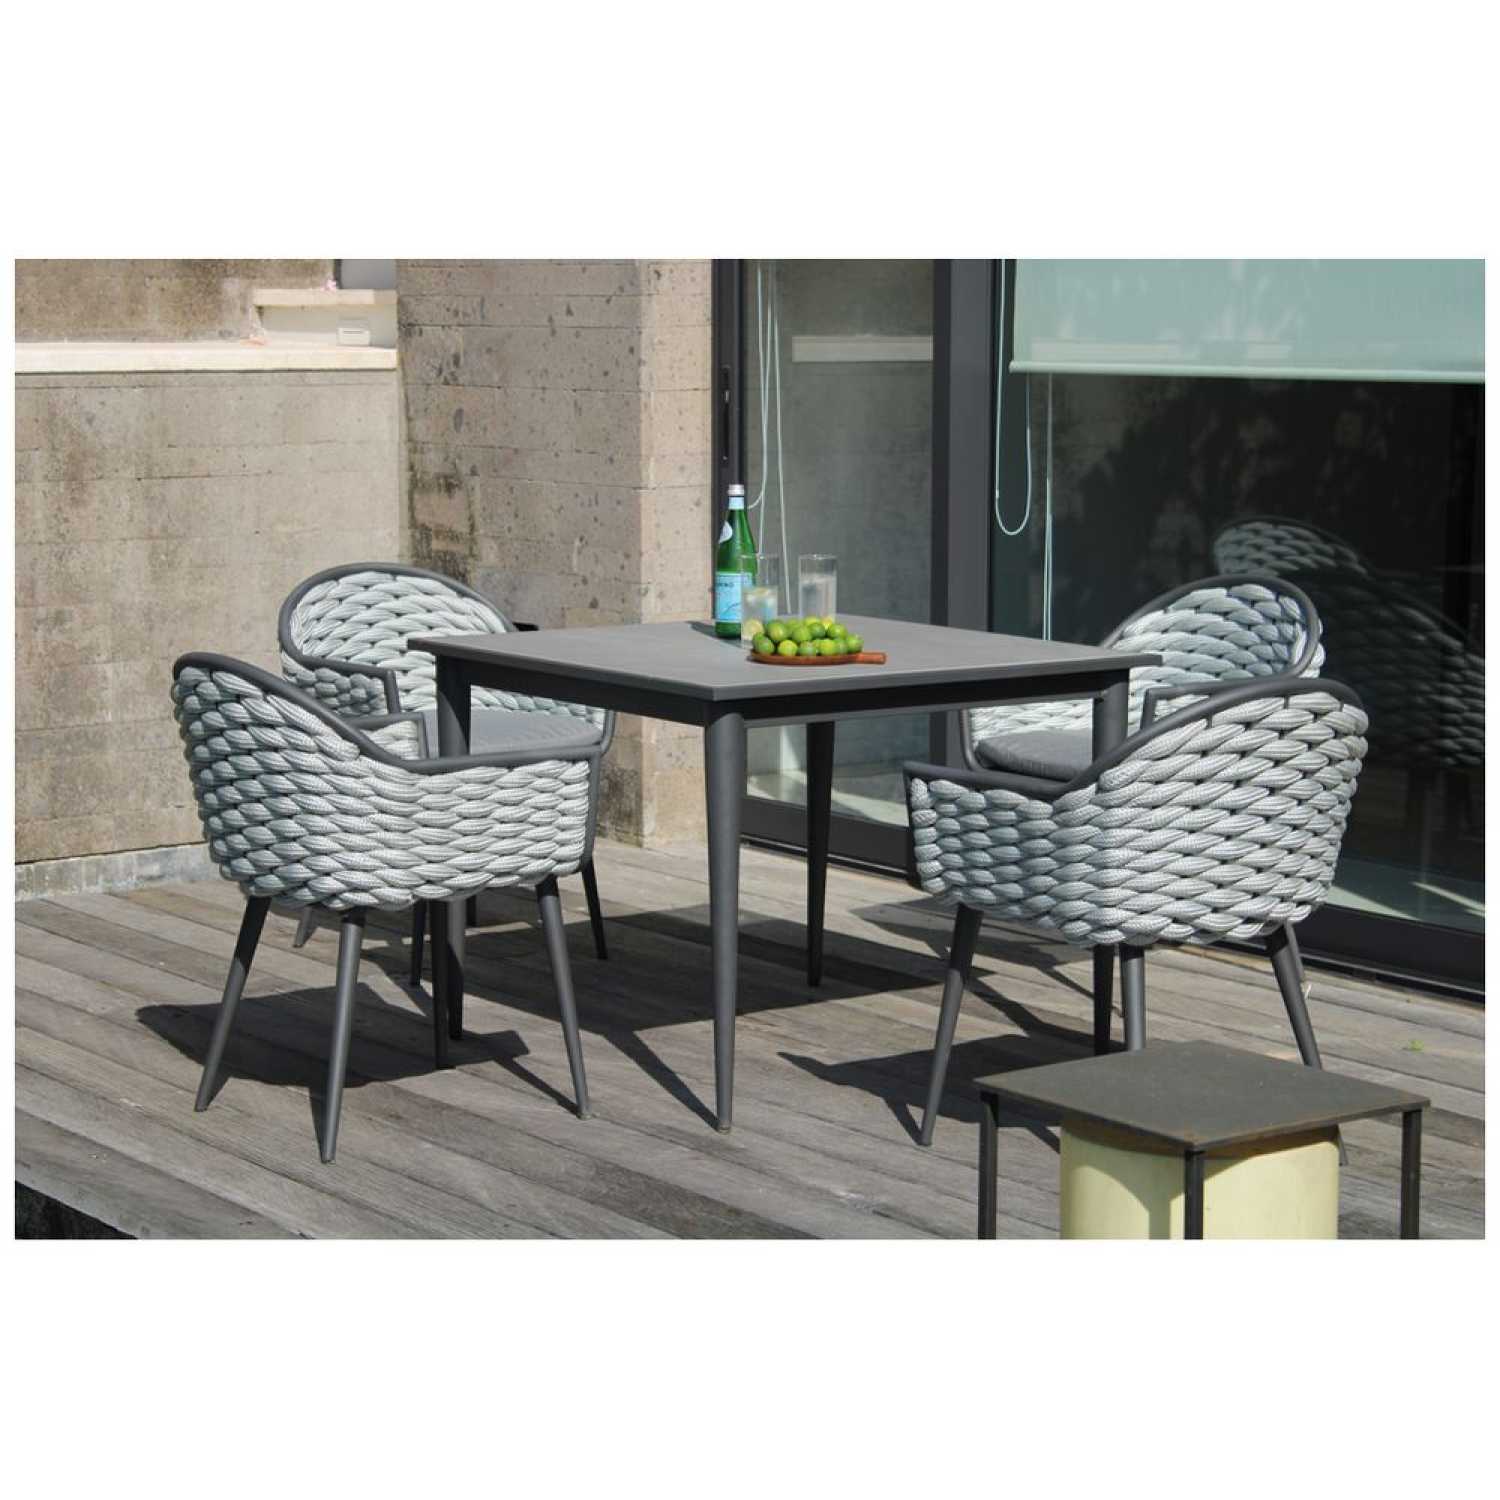 Serpent Square Dining Table - PadioLiving - Serpent Square Dining Table - Outdoor Dining Table - PadioLiving